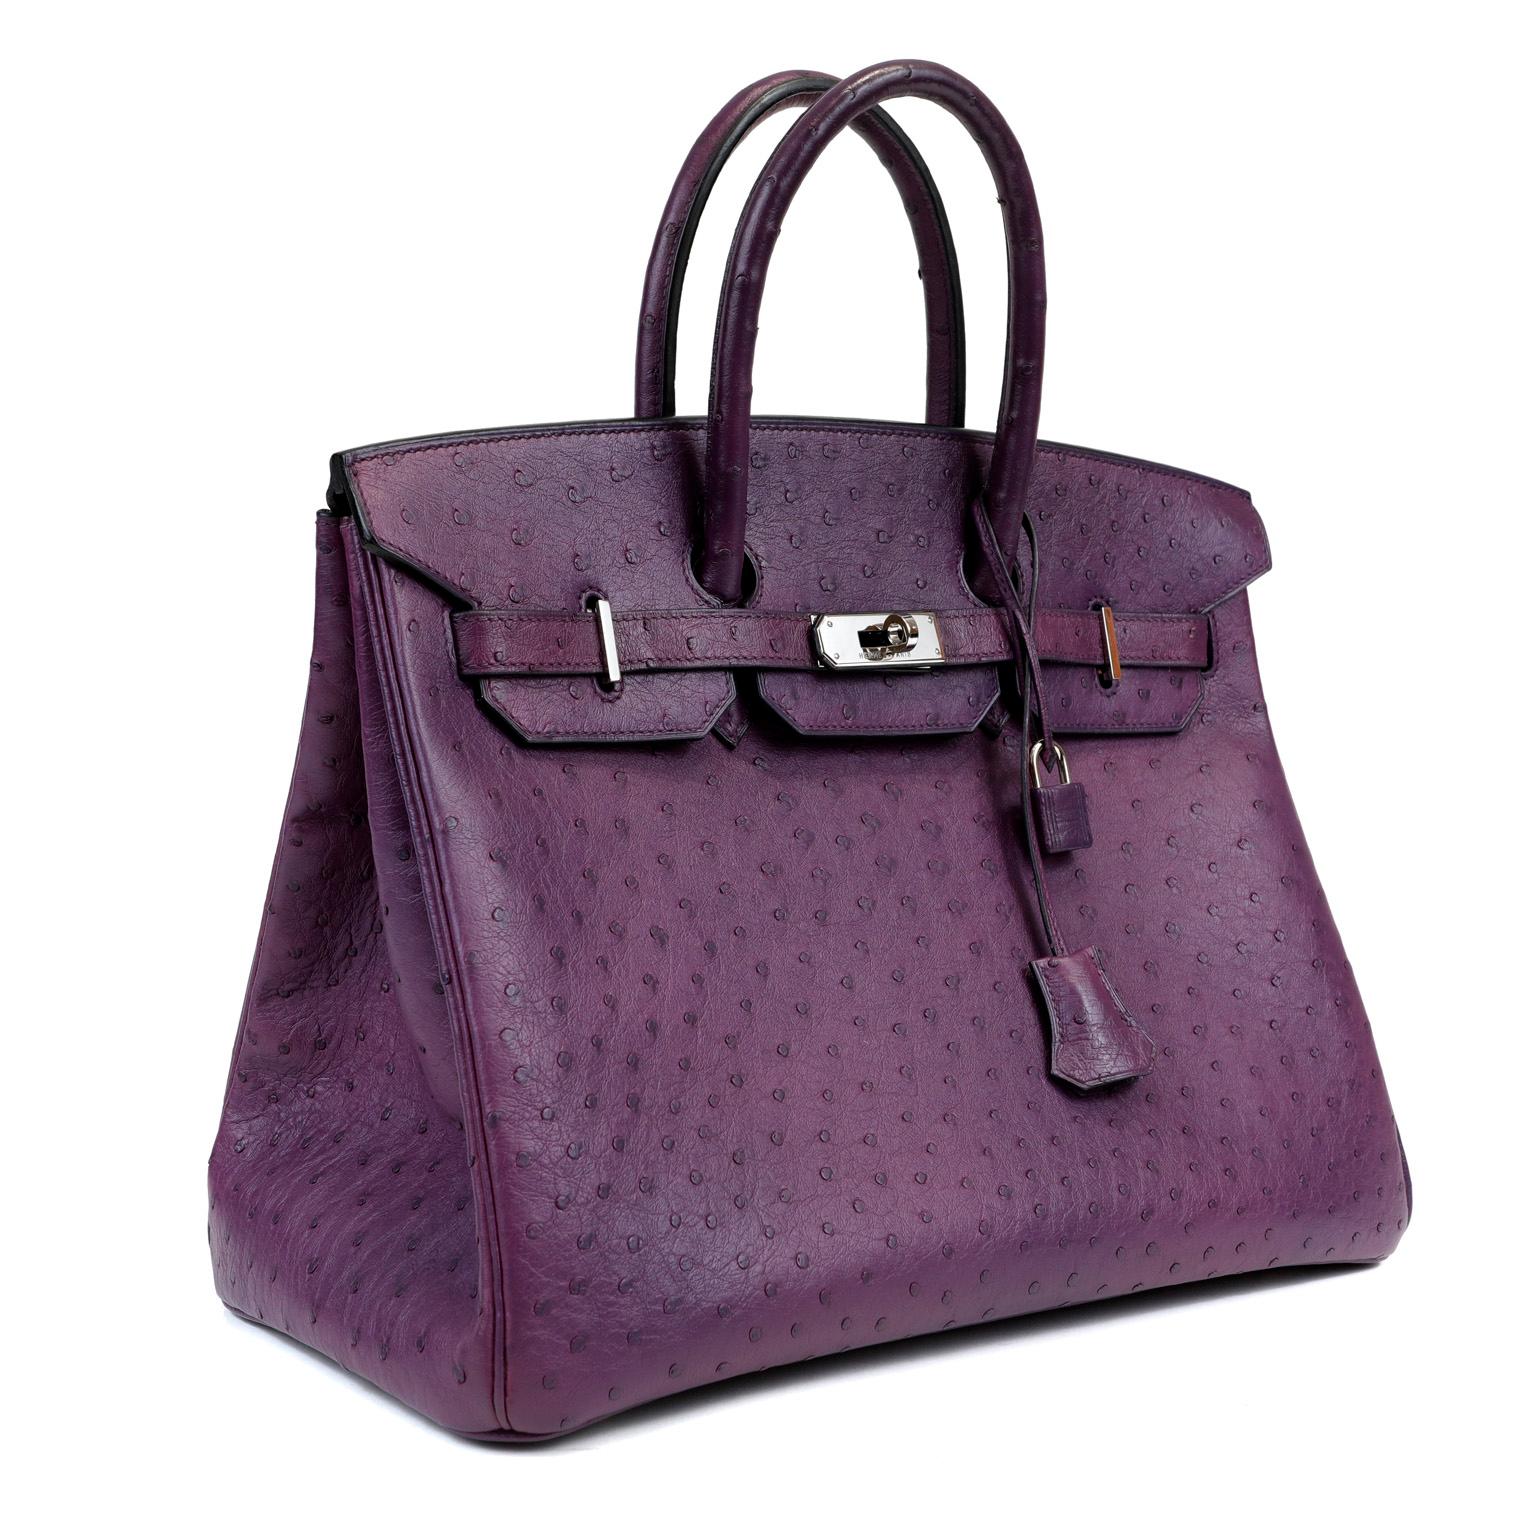 This authentic Hermès Violet Ostrich 35 cm Birkin is in excellent condition.
Hermès bags are considered the ultimate luxury item the world over. Hand stitched by skilled craftsmen, wait lists of a year or more are commonplace for the bovine